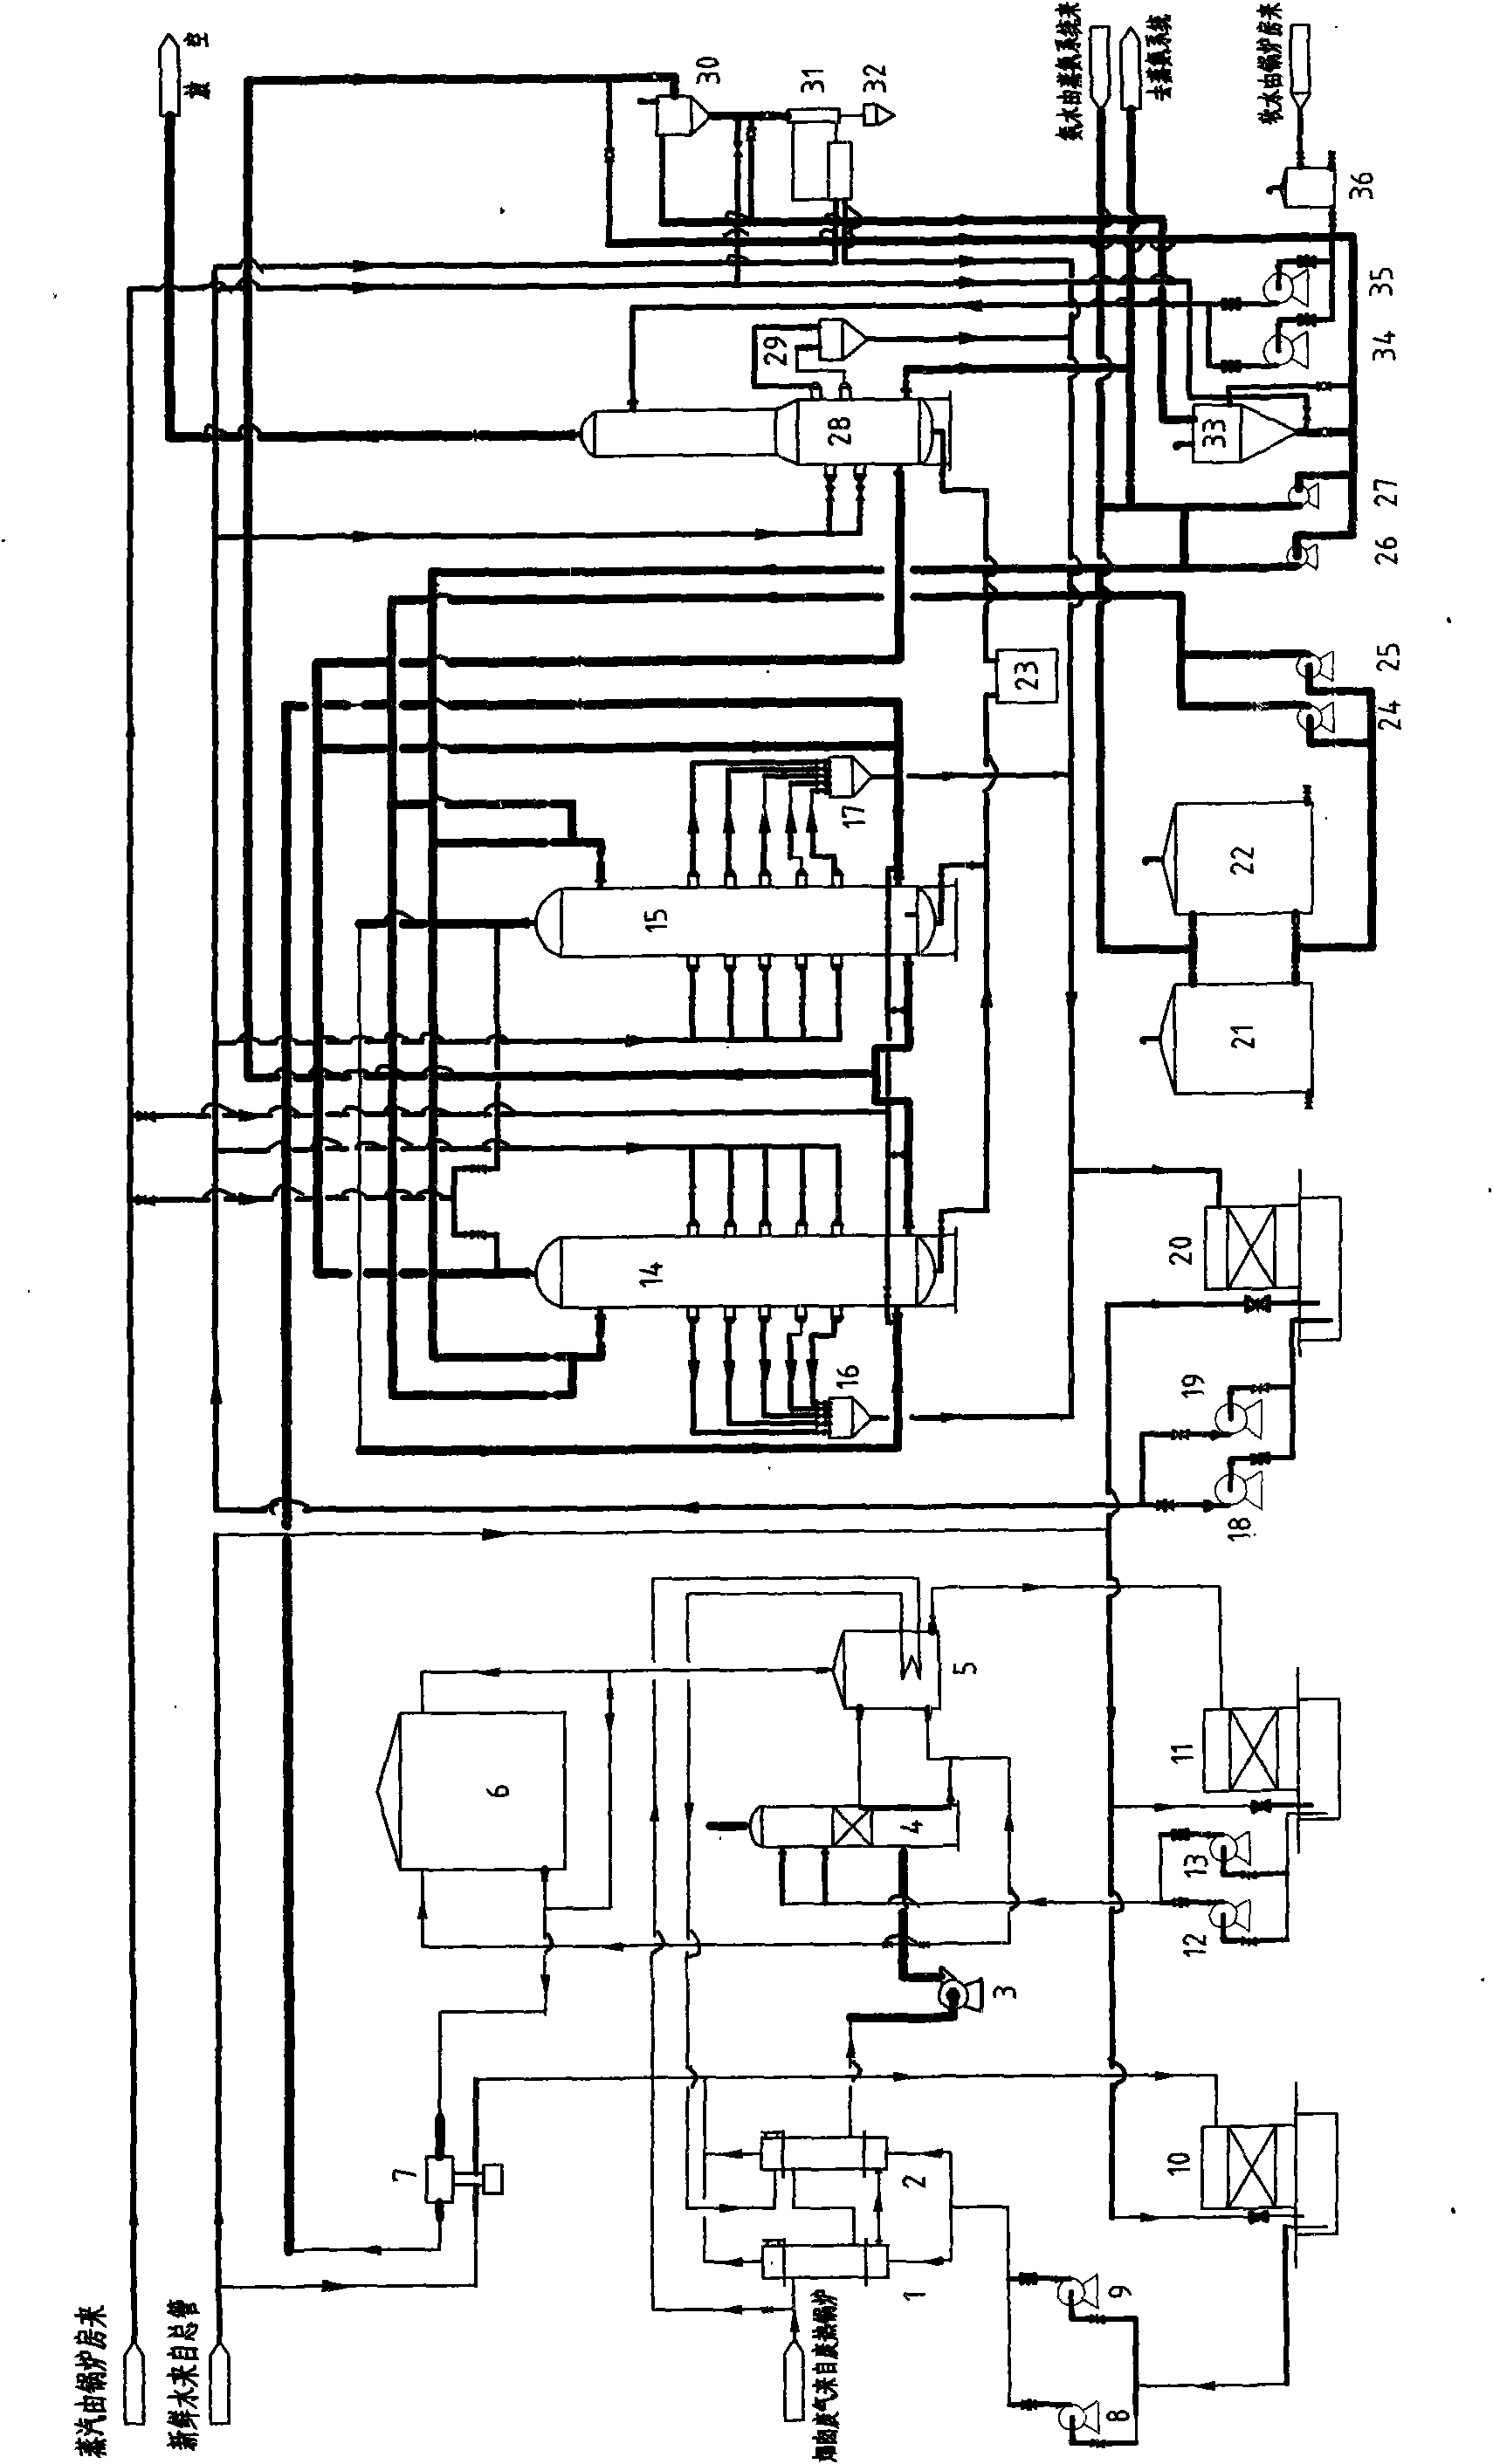 Process method for co-producing ammonium bicarbonate by using coking plant waste